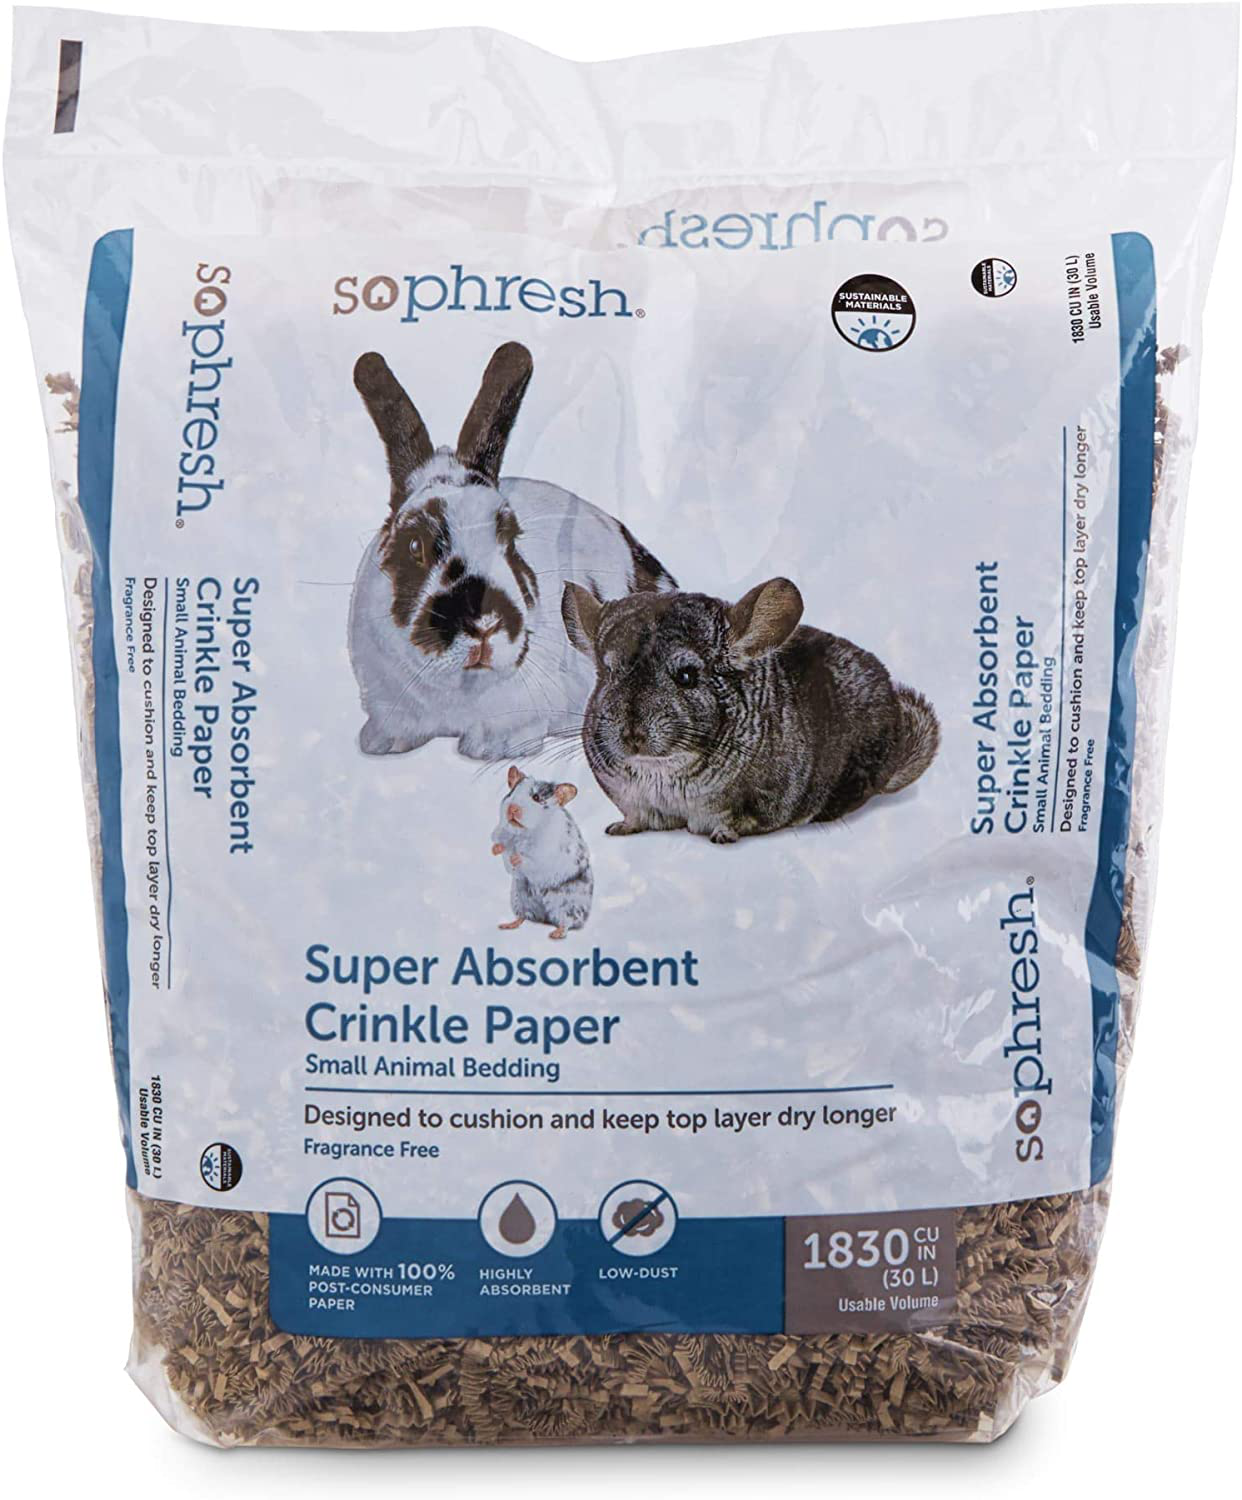 Petco Brand - so Phresh Super-Absorbent Recycled Crinkle Paper Small Animal Bedding